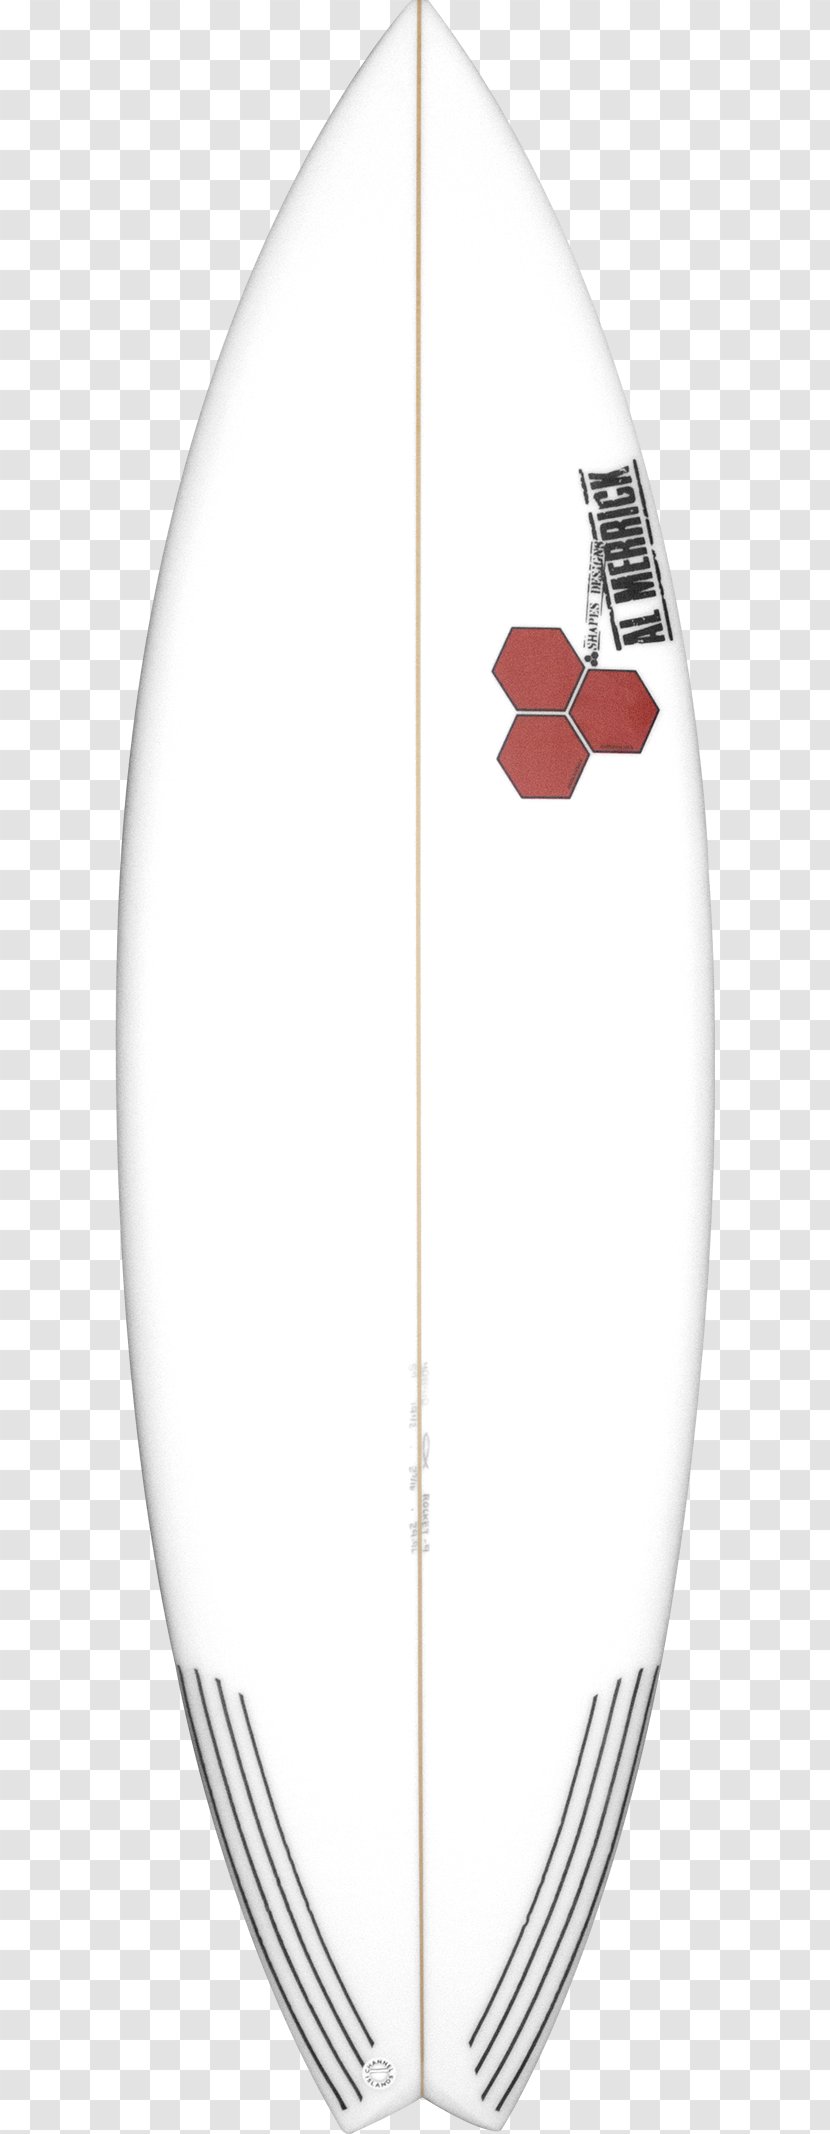 Surfboard Jasper Vos Scooters Surfing Go Fish IEEE 1394 Transparent PNG